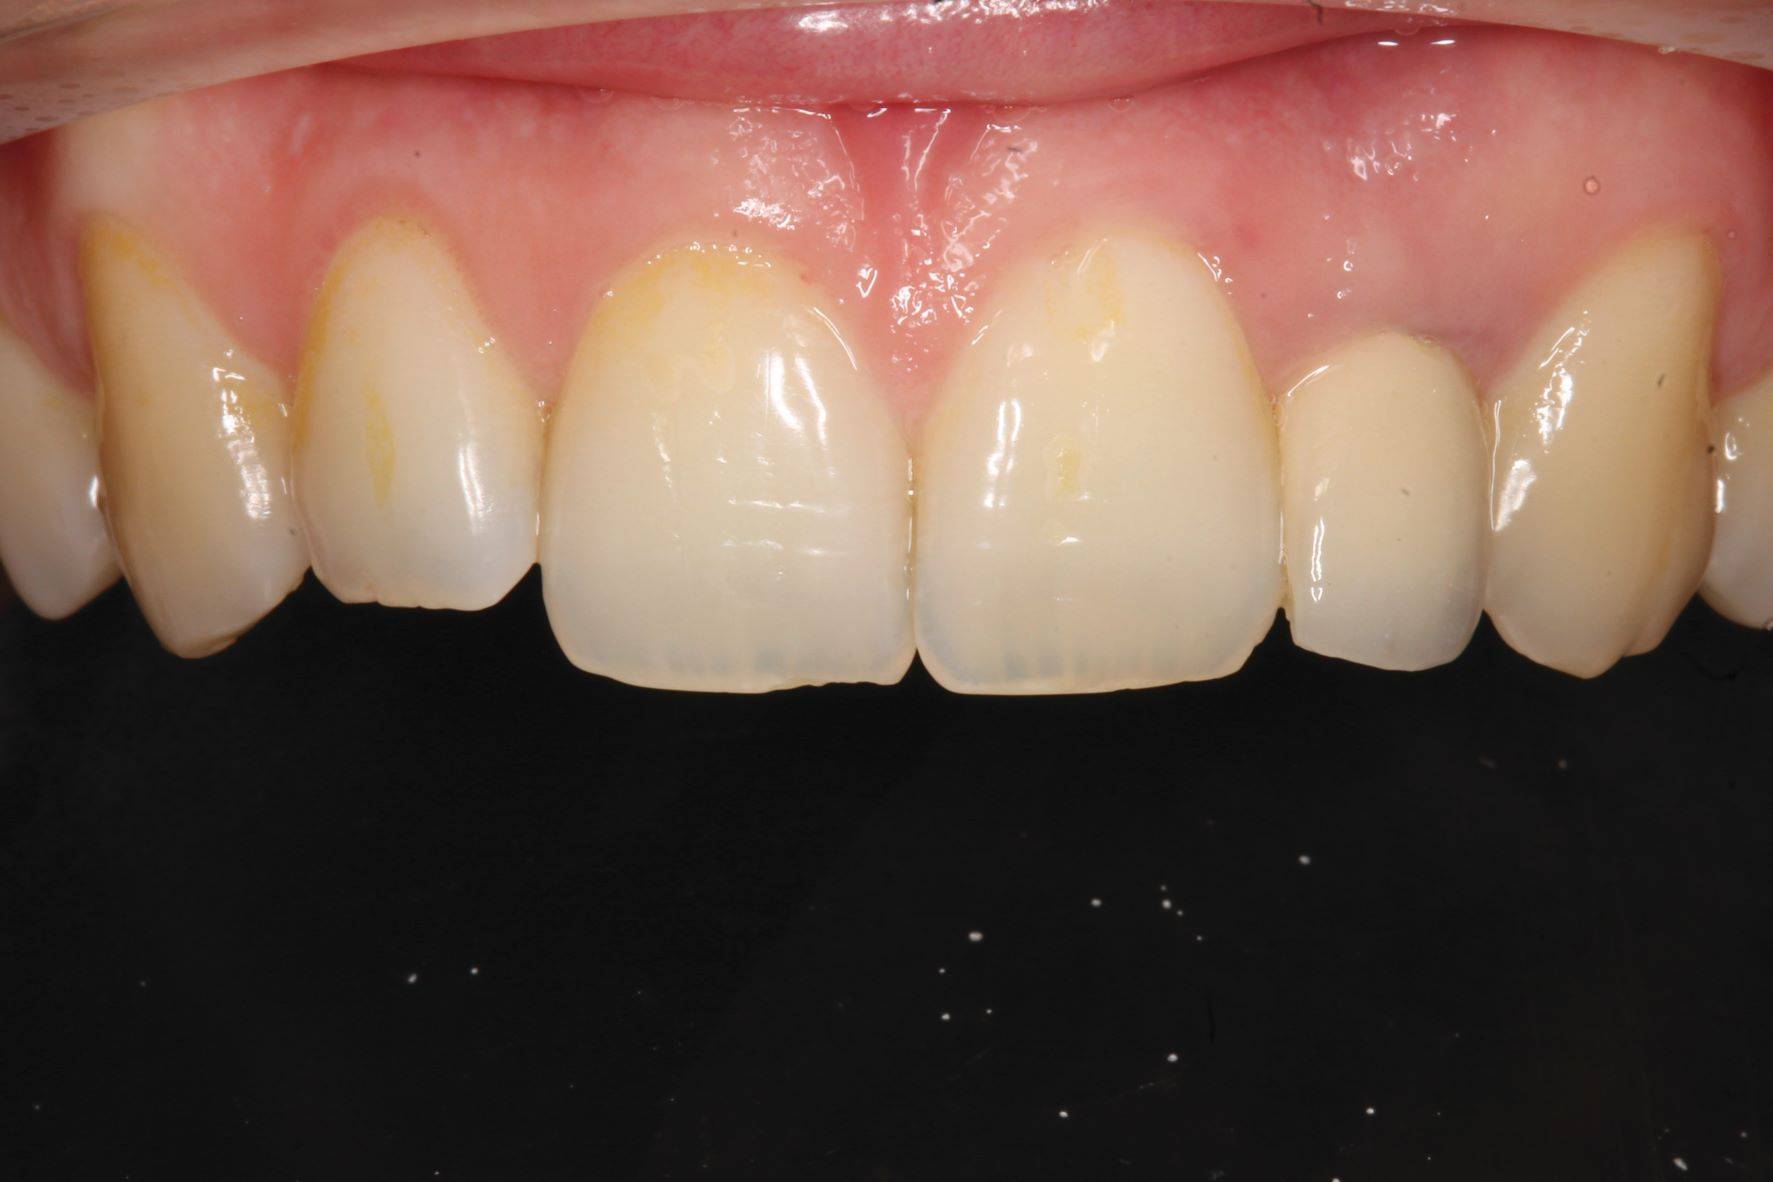 Upper teeth pre-operative frontal view